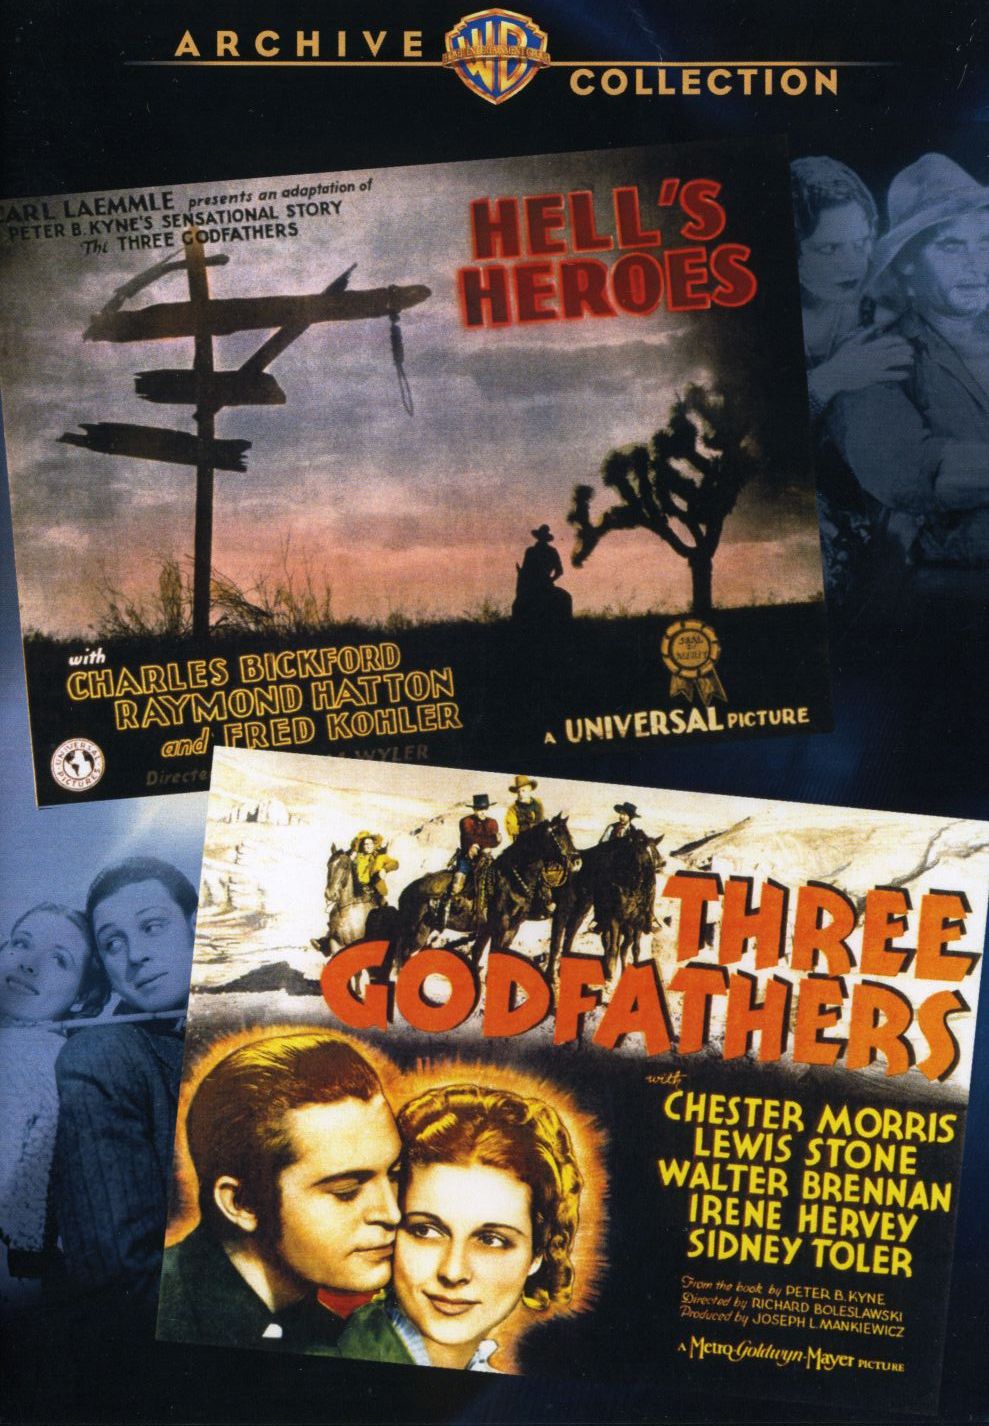 WAC DOUBLE FEATURES: HELLS HEROES/THREE GODFATHER